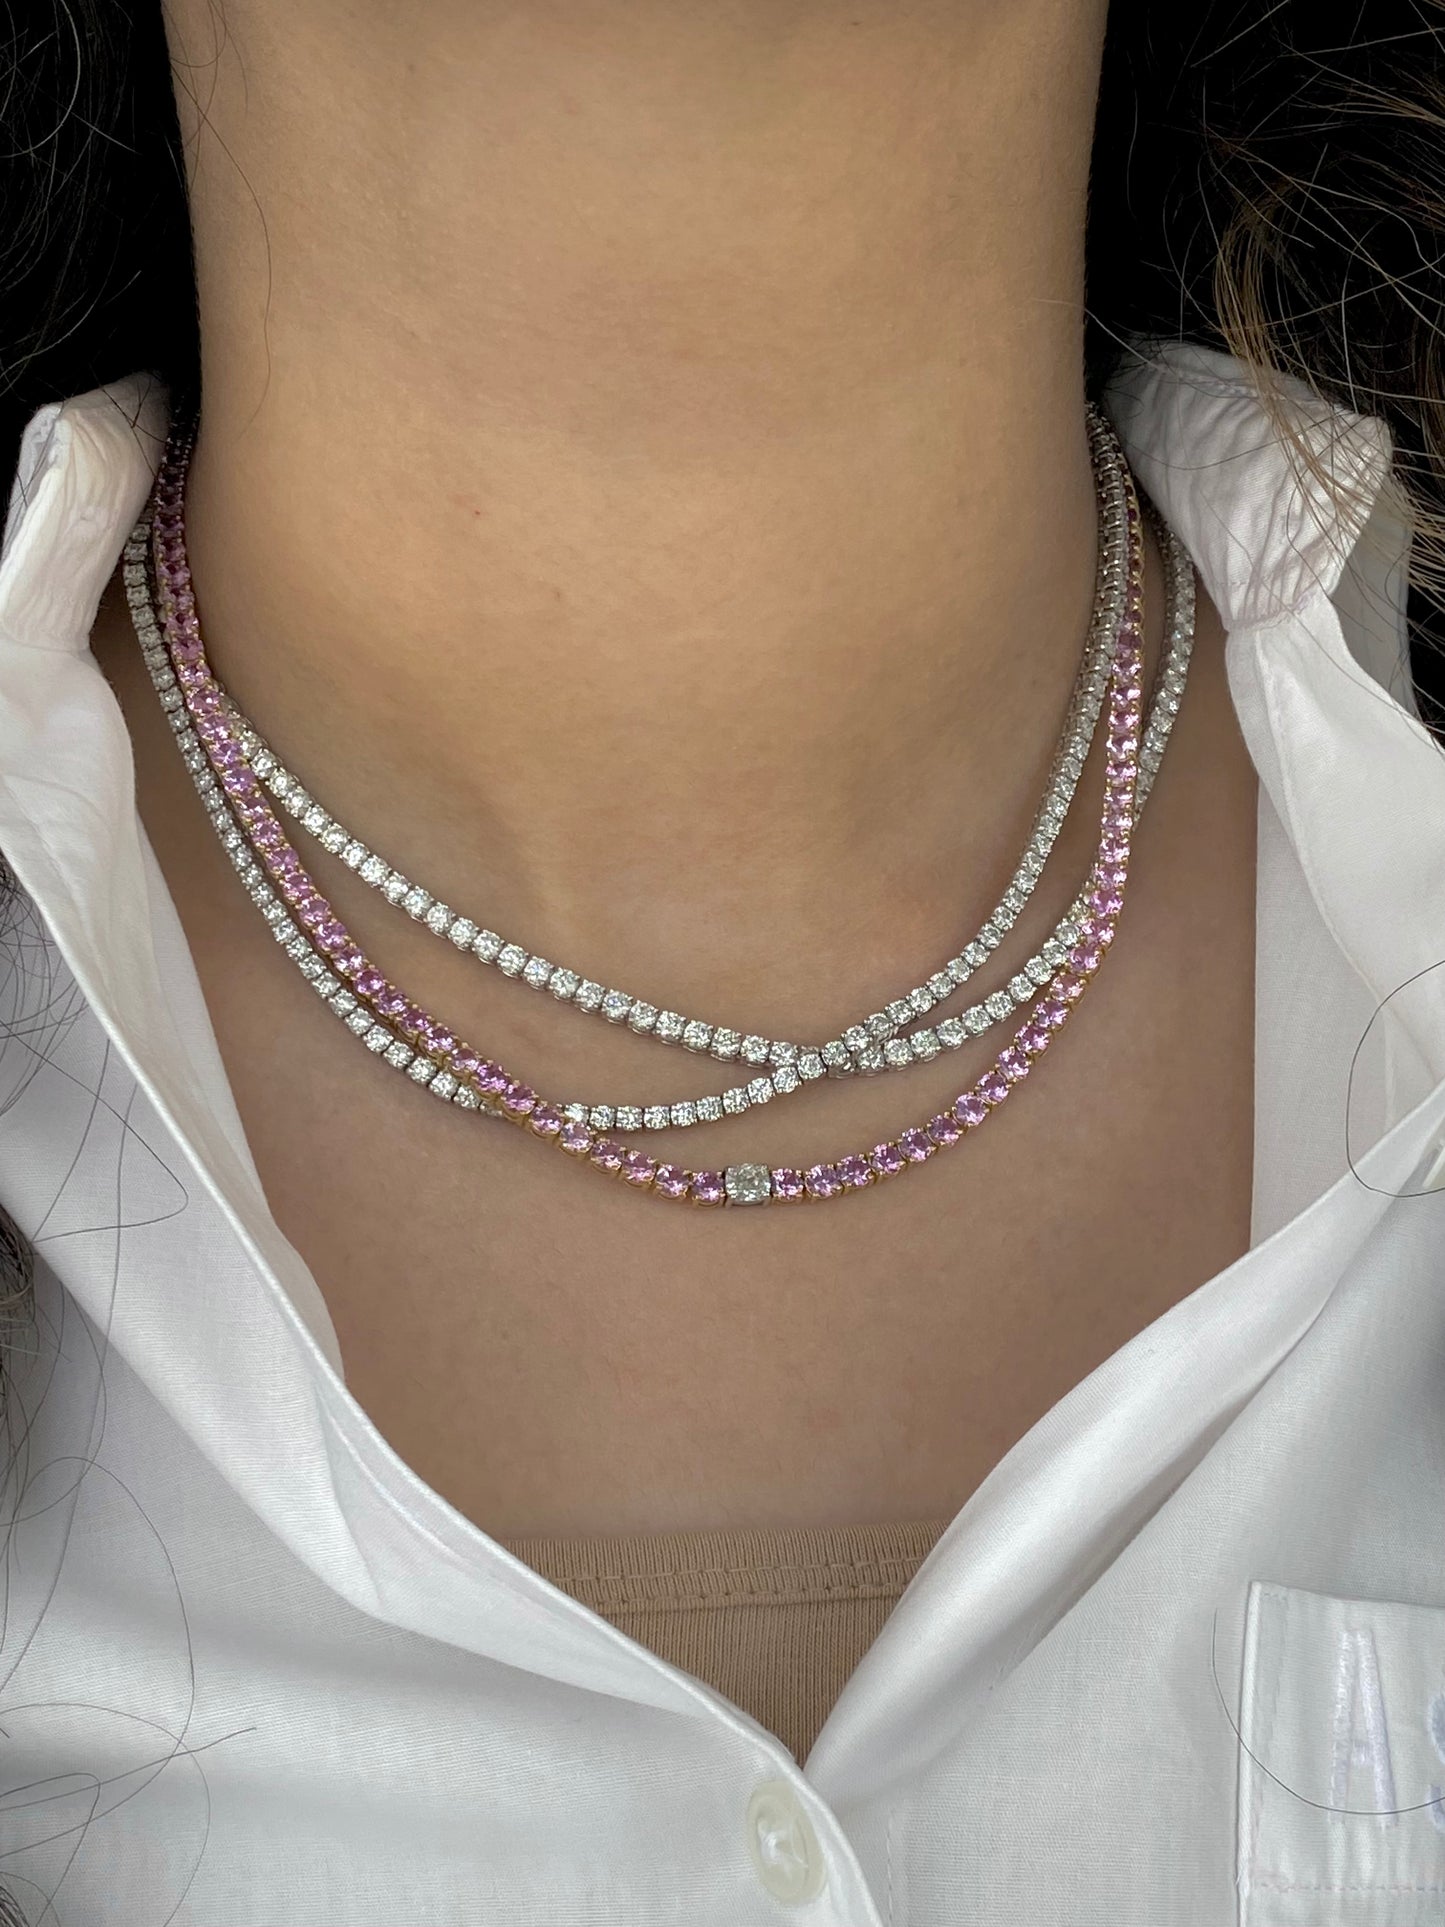 GIA 0.5 ct Solitaire Cushion Diamond Pink Sapphire Necklace